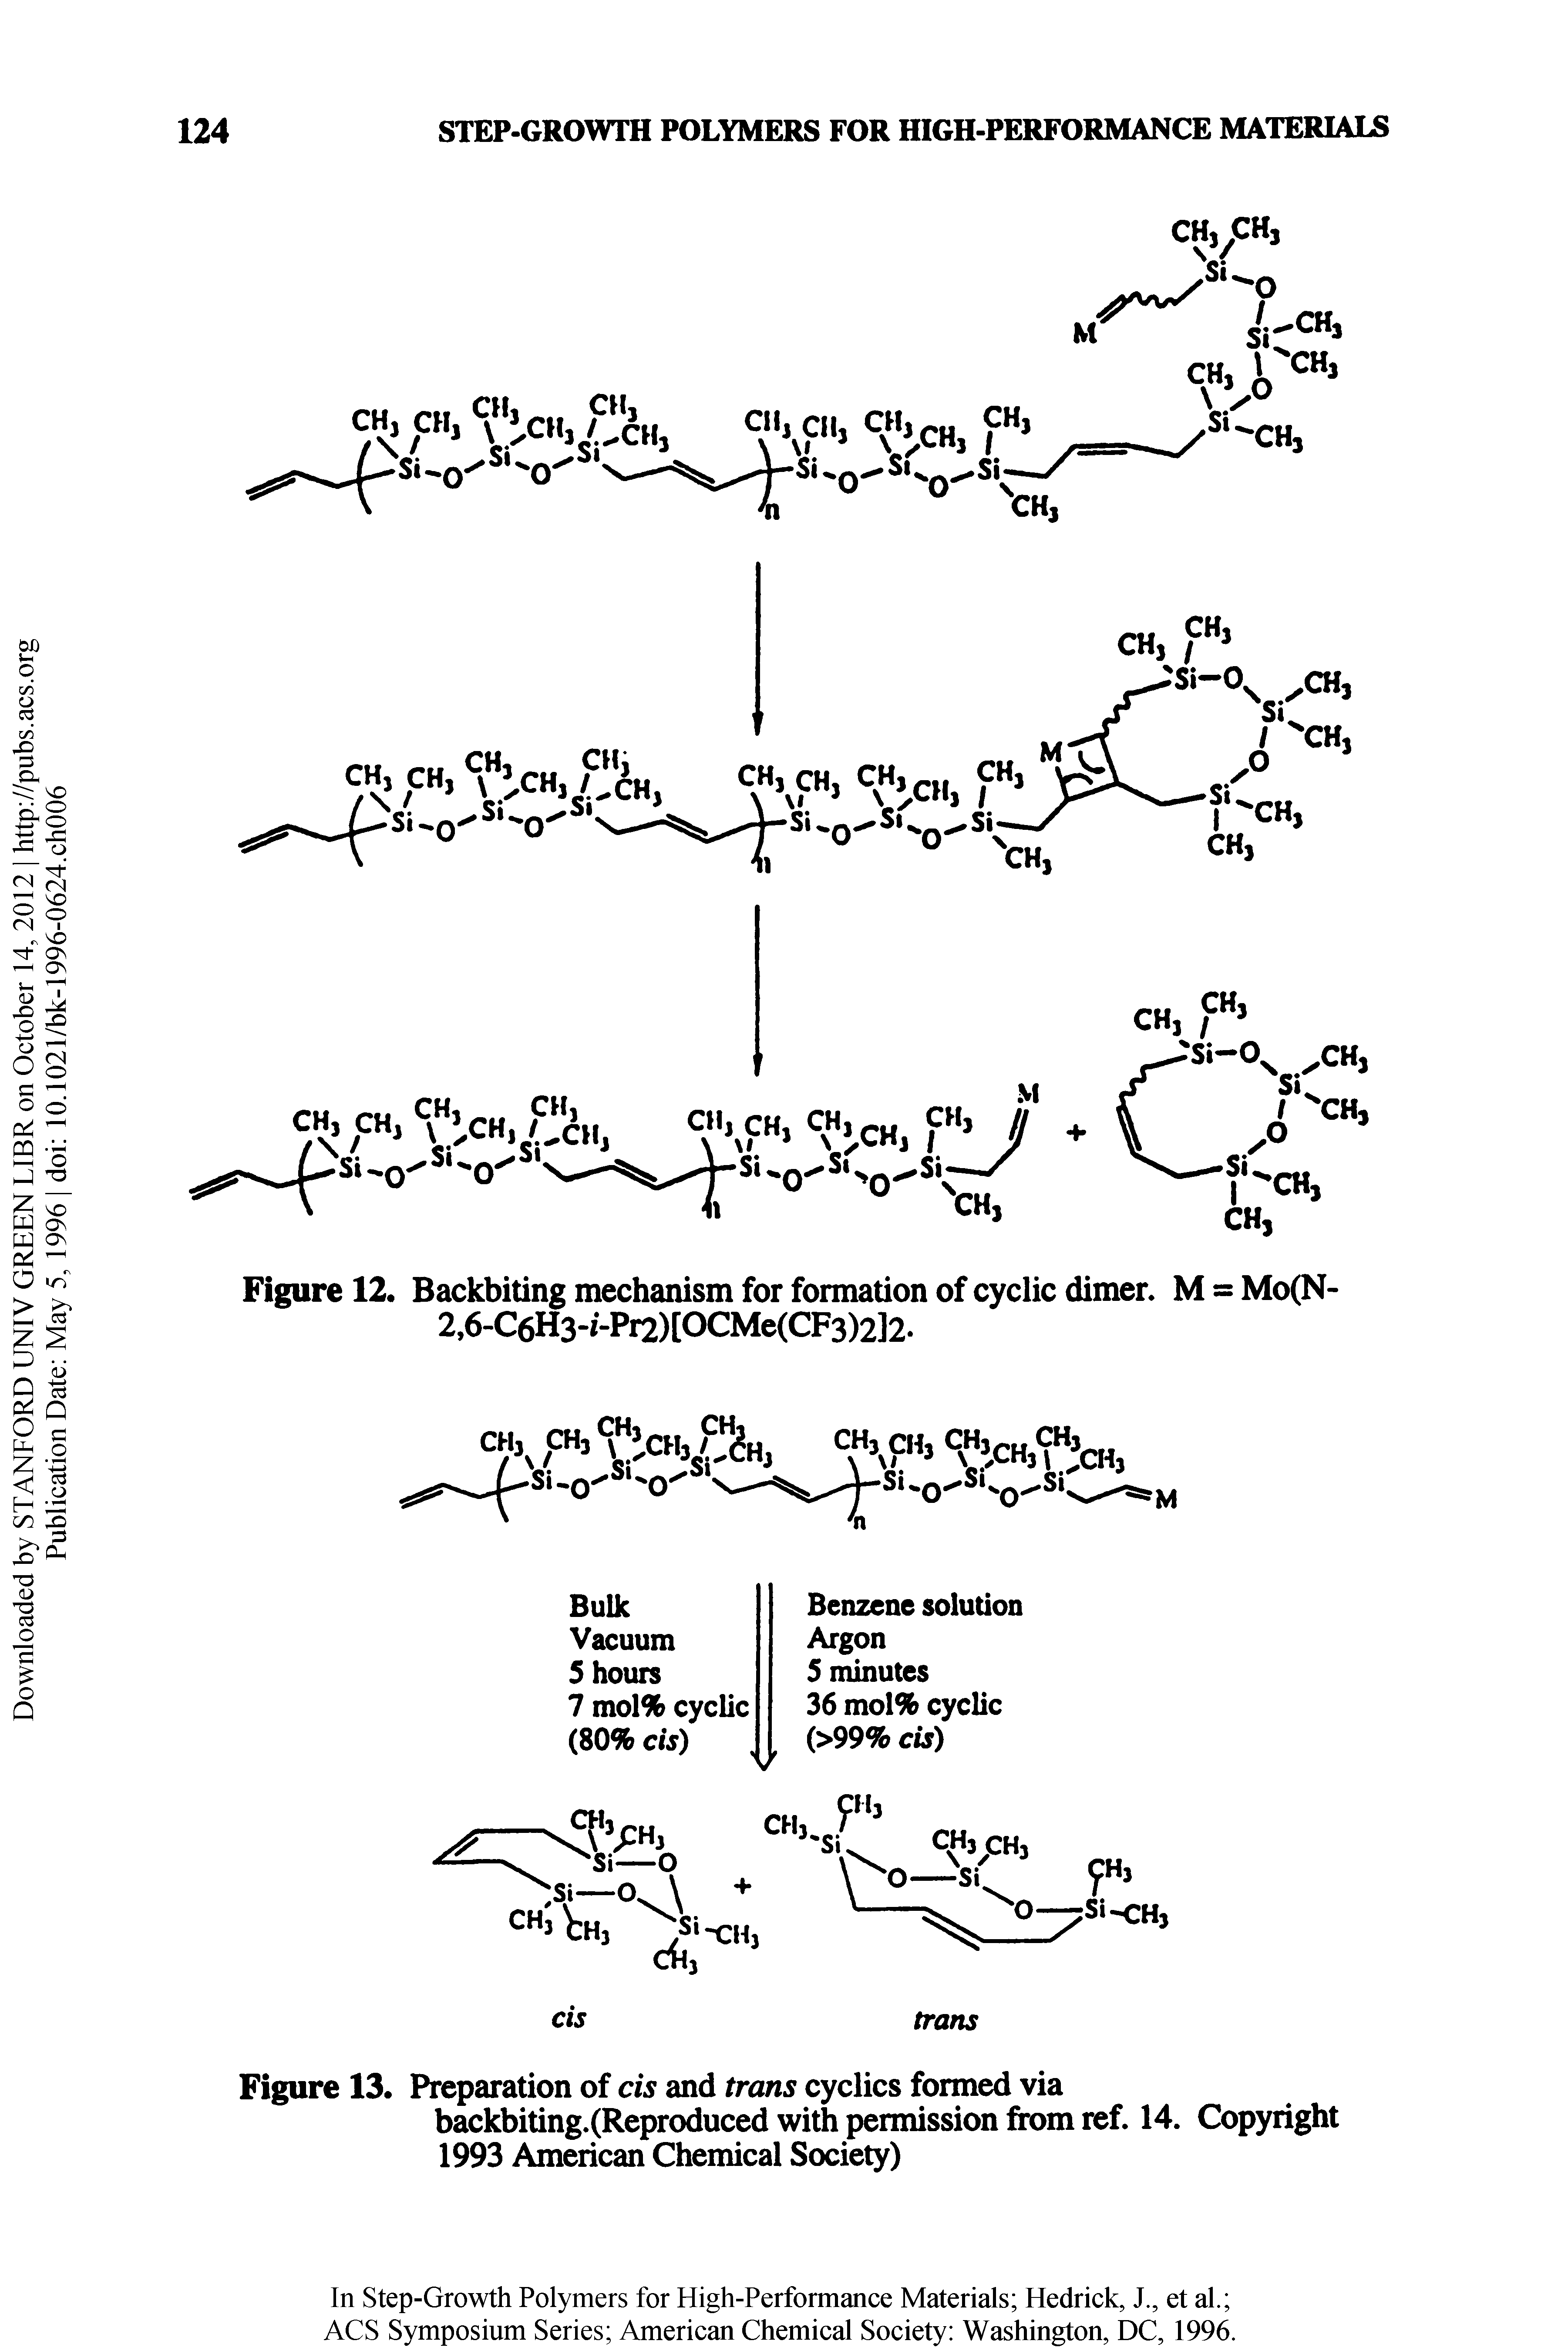 Figure 12. Backbiting mechanism for formation of cyclic dimer. M = Mo(N-...